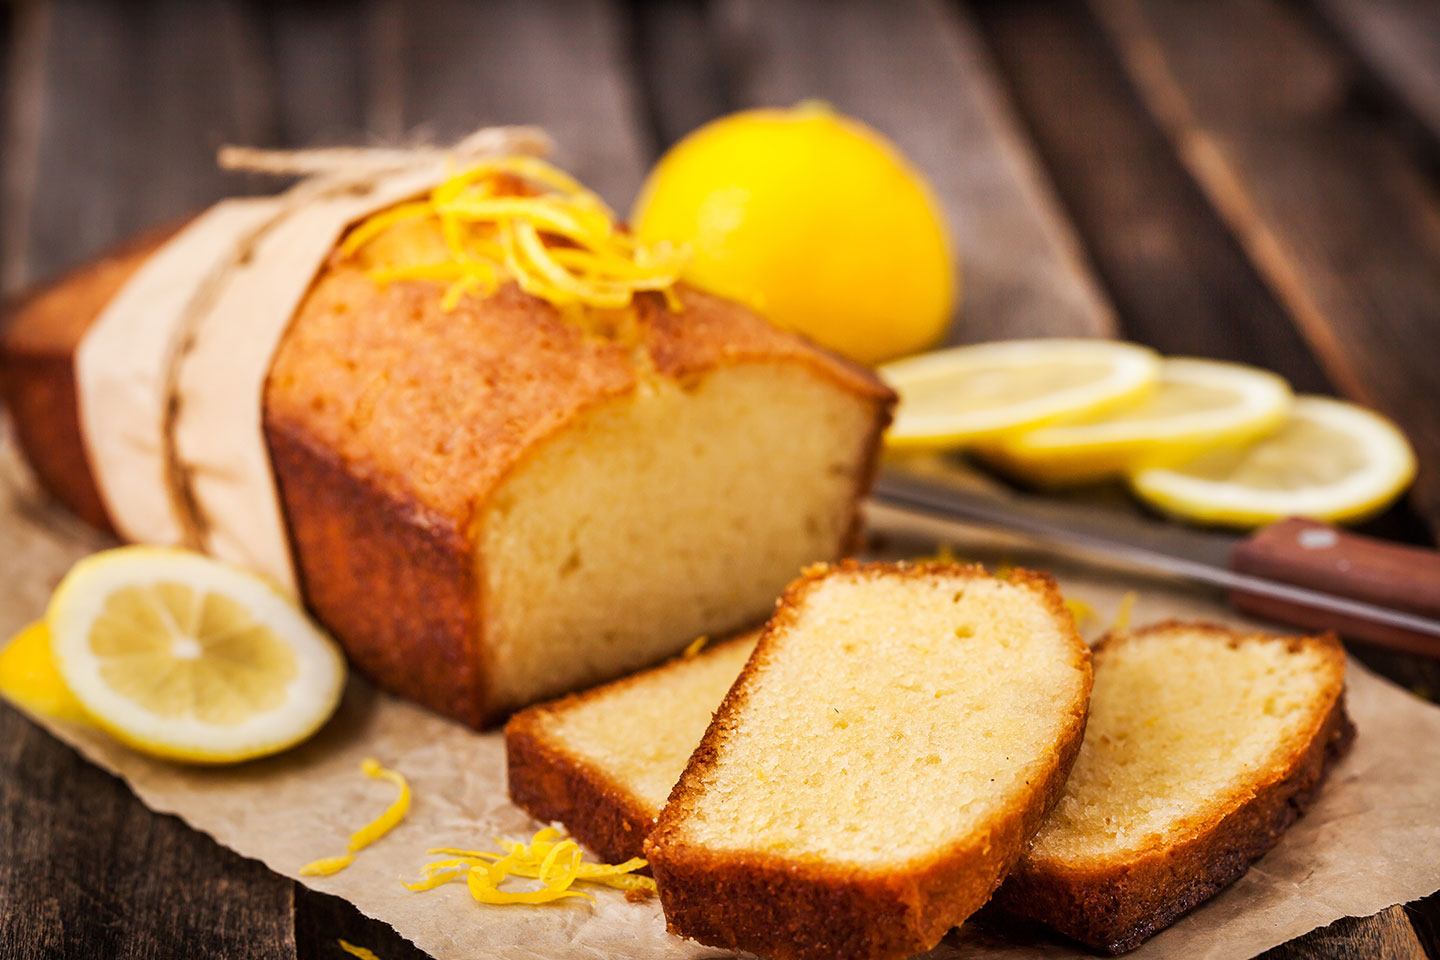 A Lemon Cake Recipe By EHL Chefs